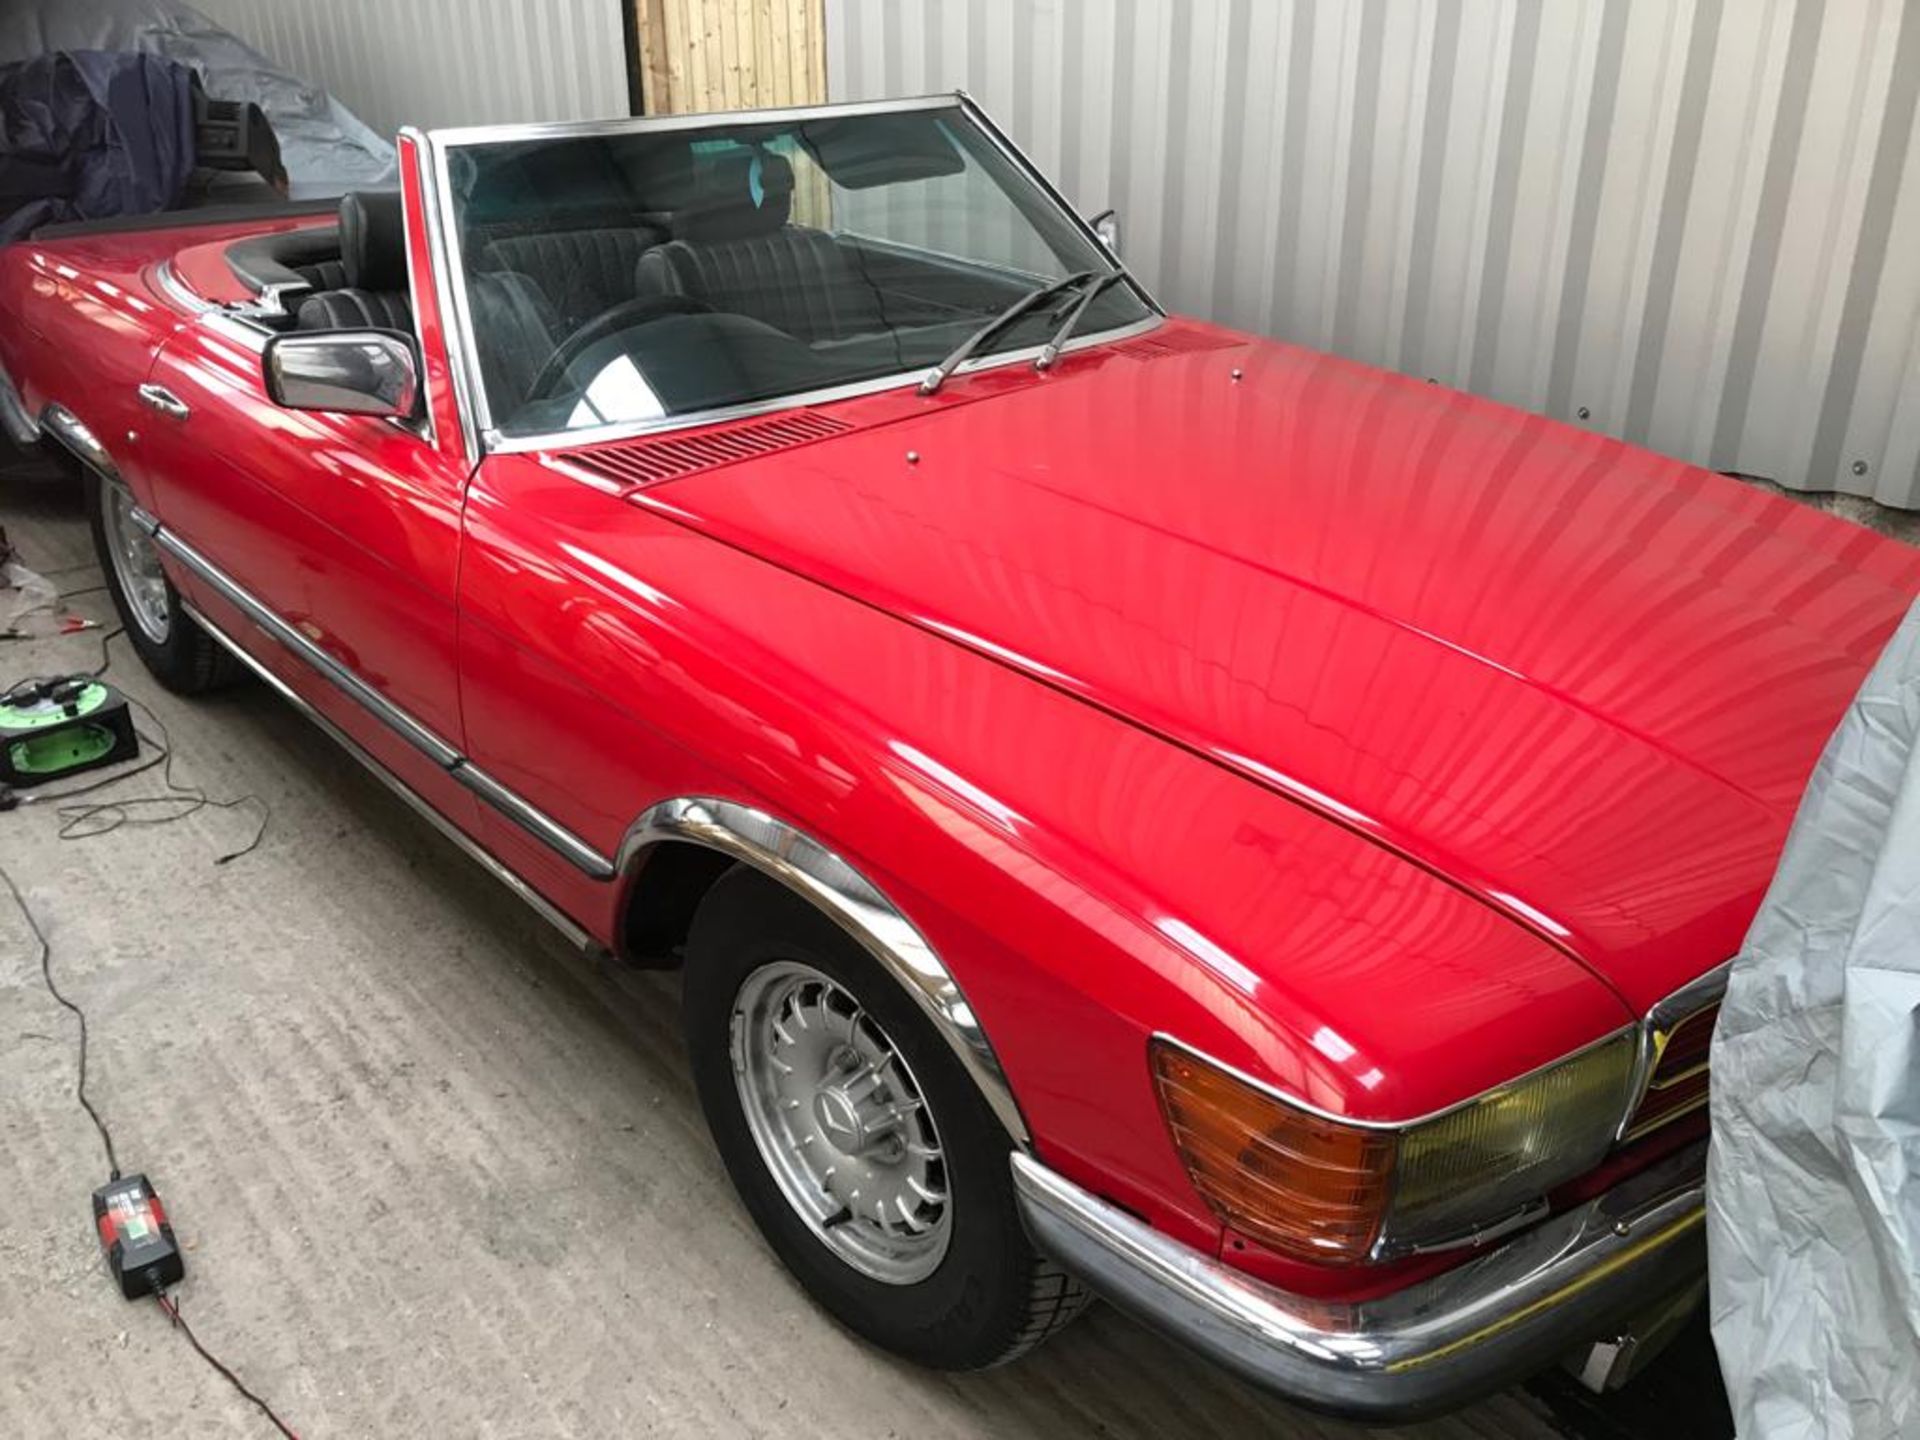 Mercedes 500SL R107 - 69,938 Miles - CL331 - Location: Manchester - No VAT on the hammer! This 500SL